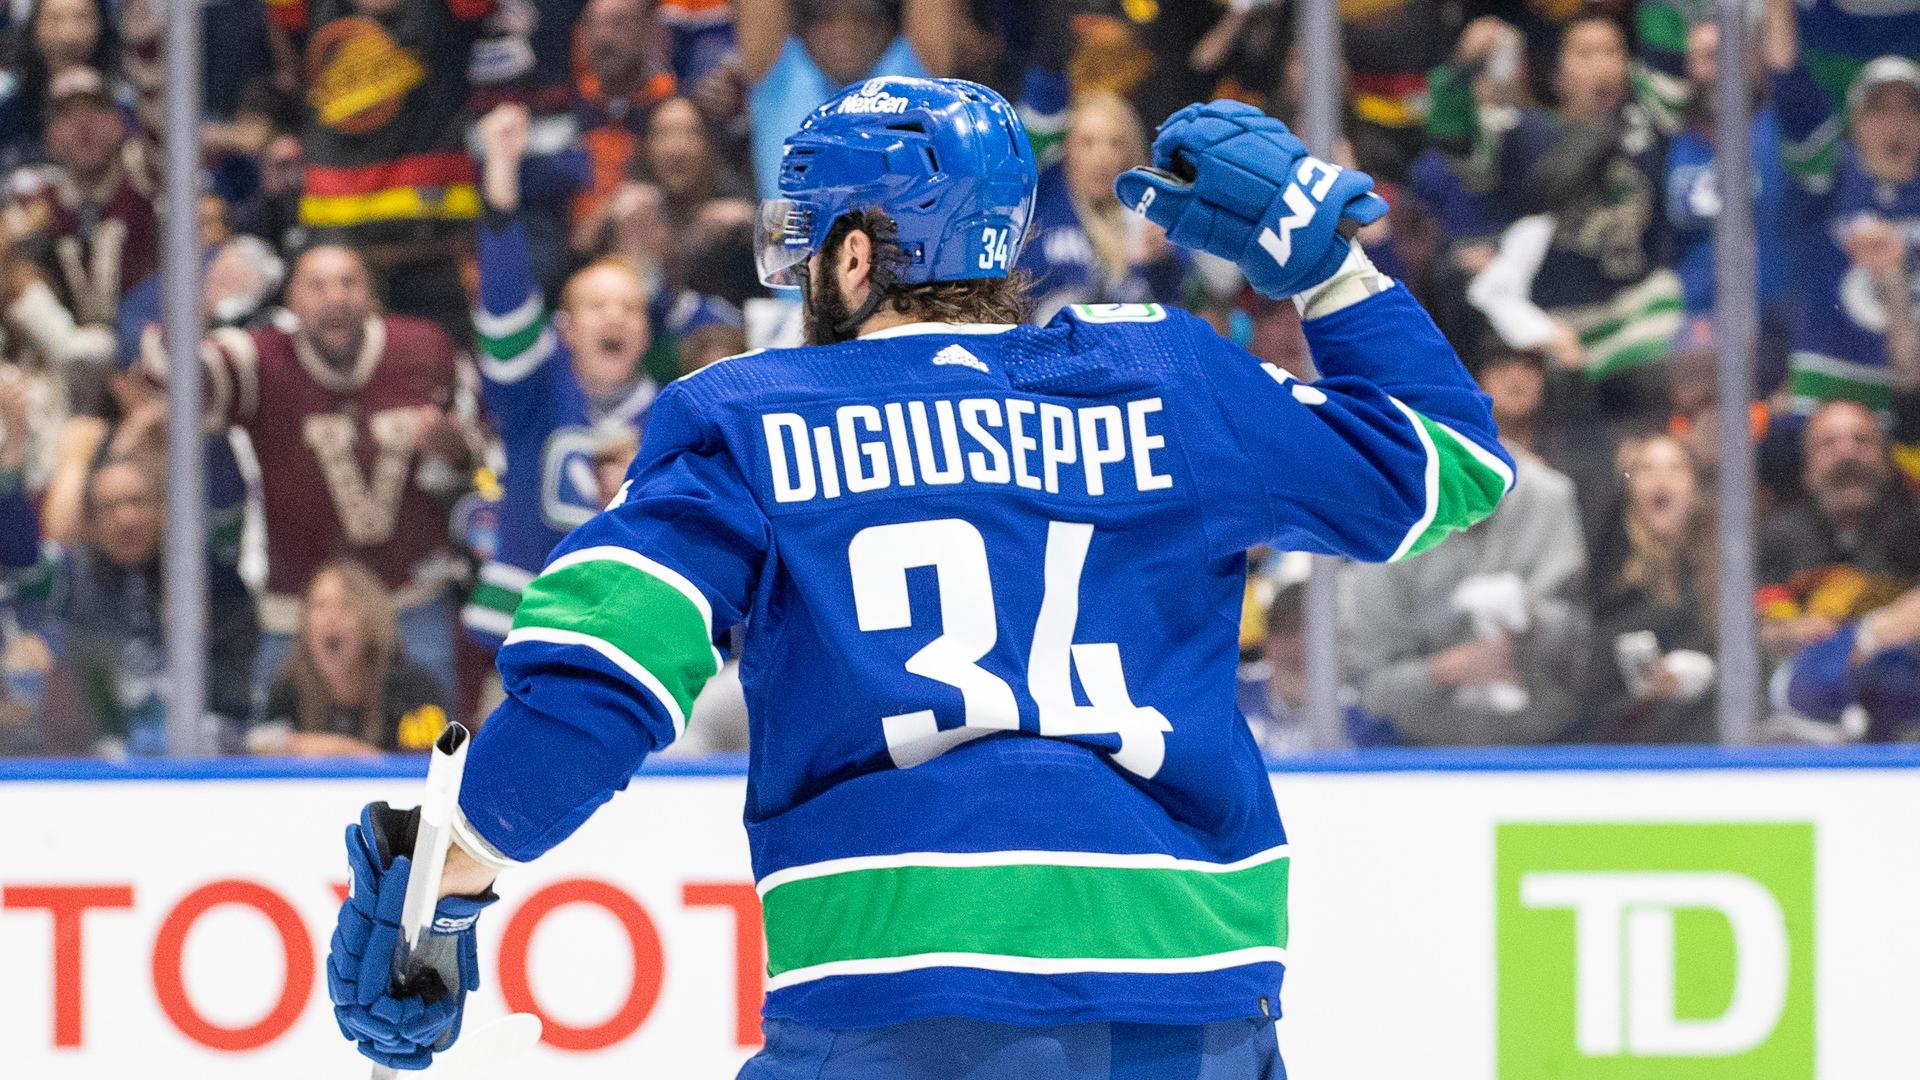 Phillip Di Giuseppe equalizes for Canucks to make it 2-2